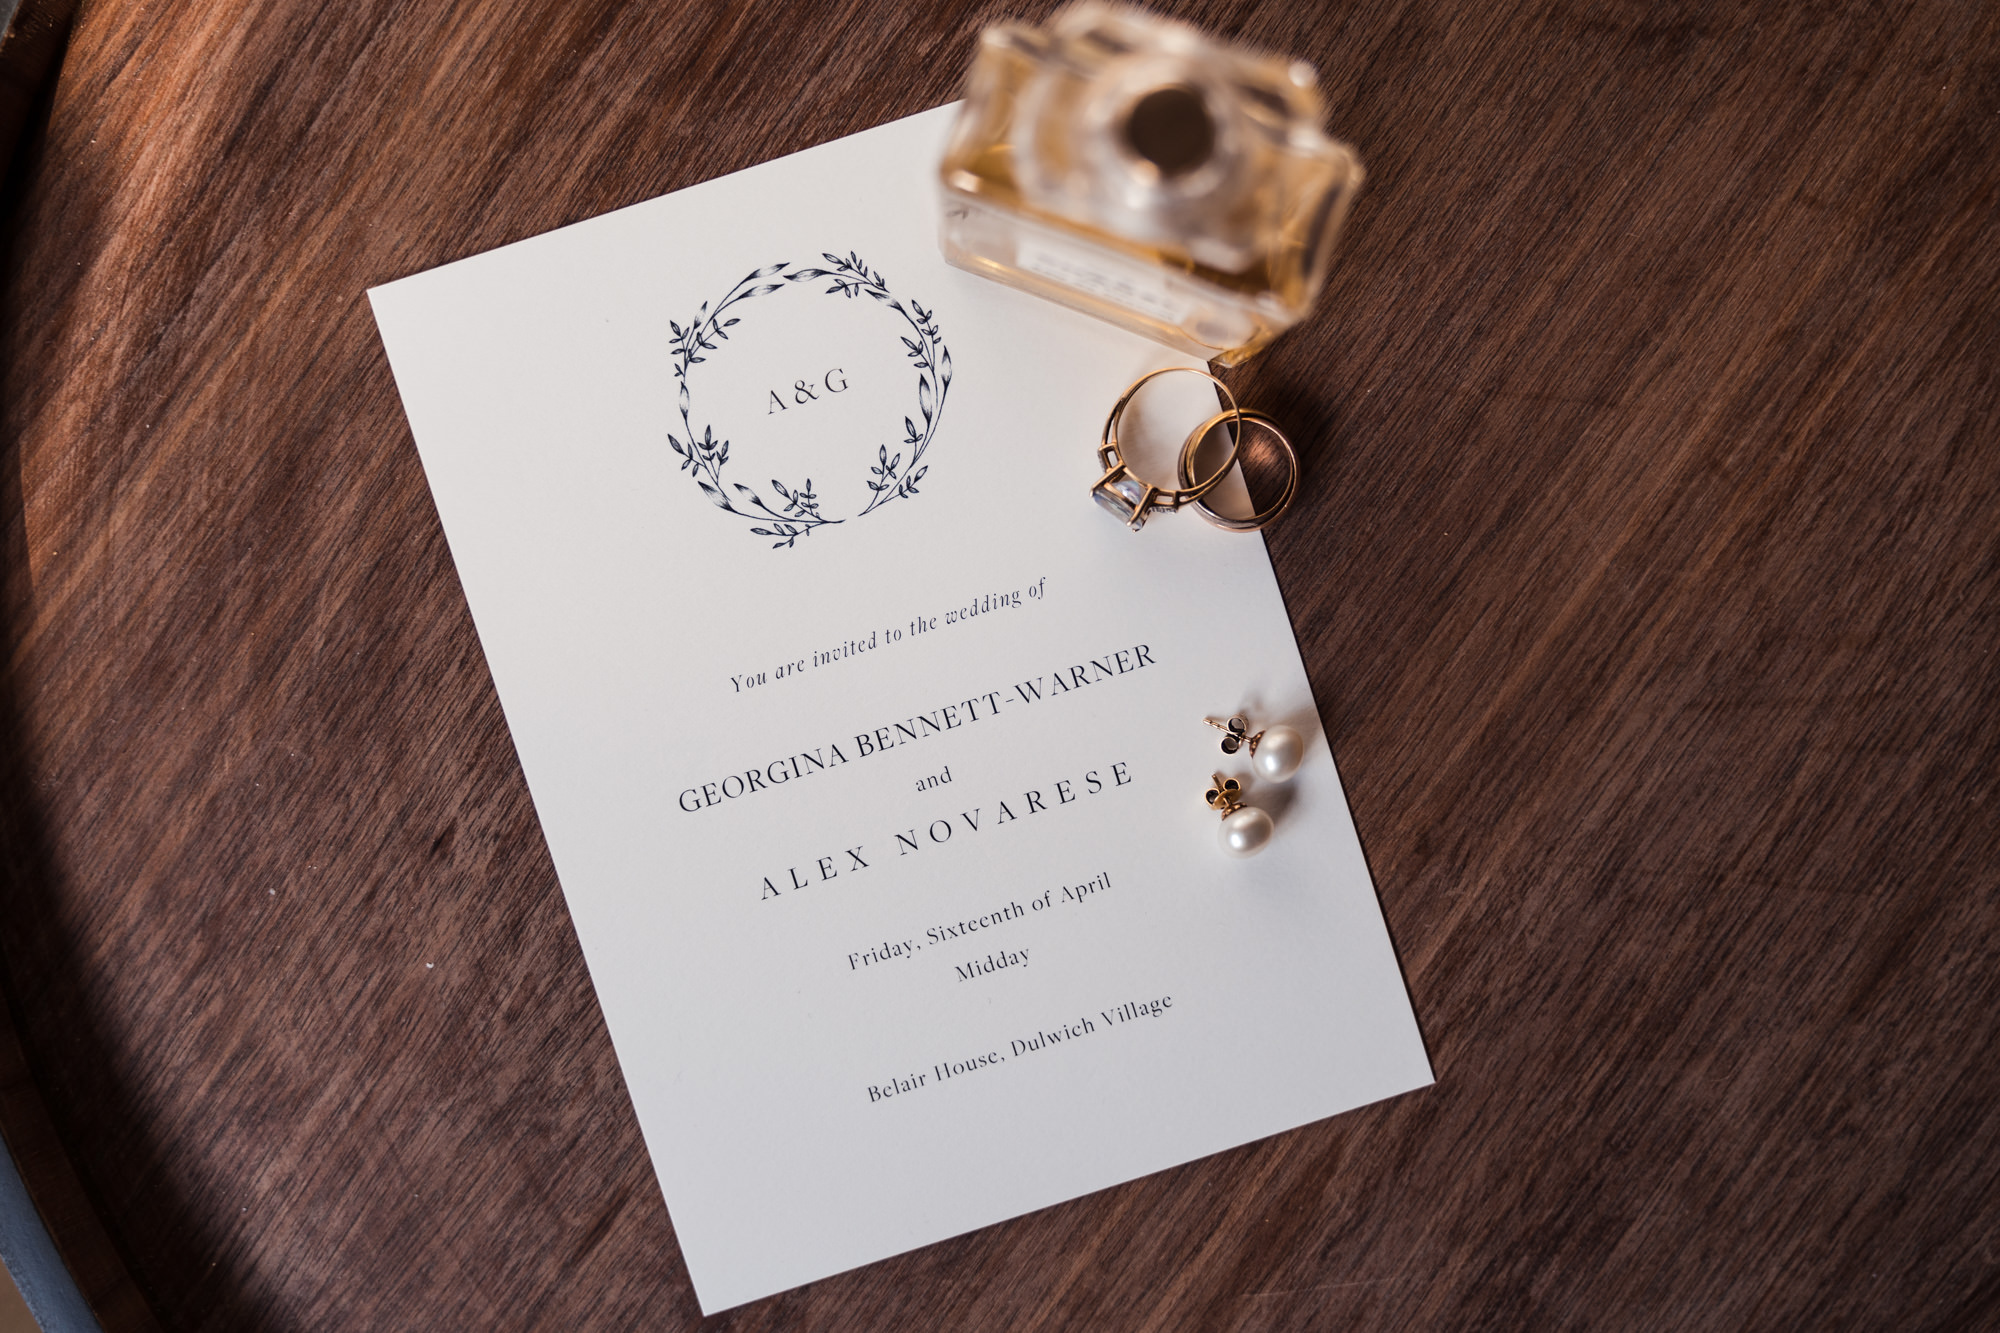 photograph of bride and grooms wedding invite decorated with a perfume bottle and vintage rings